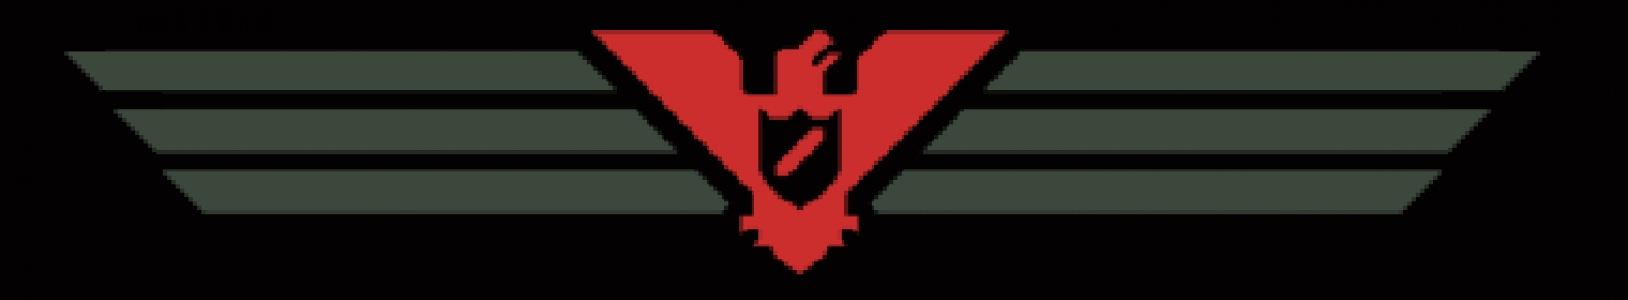 Papers, Please banner